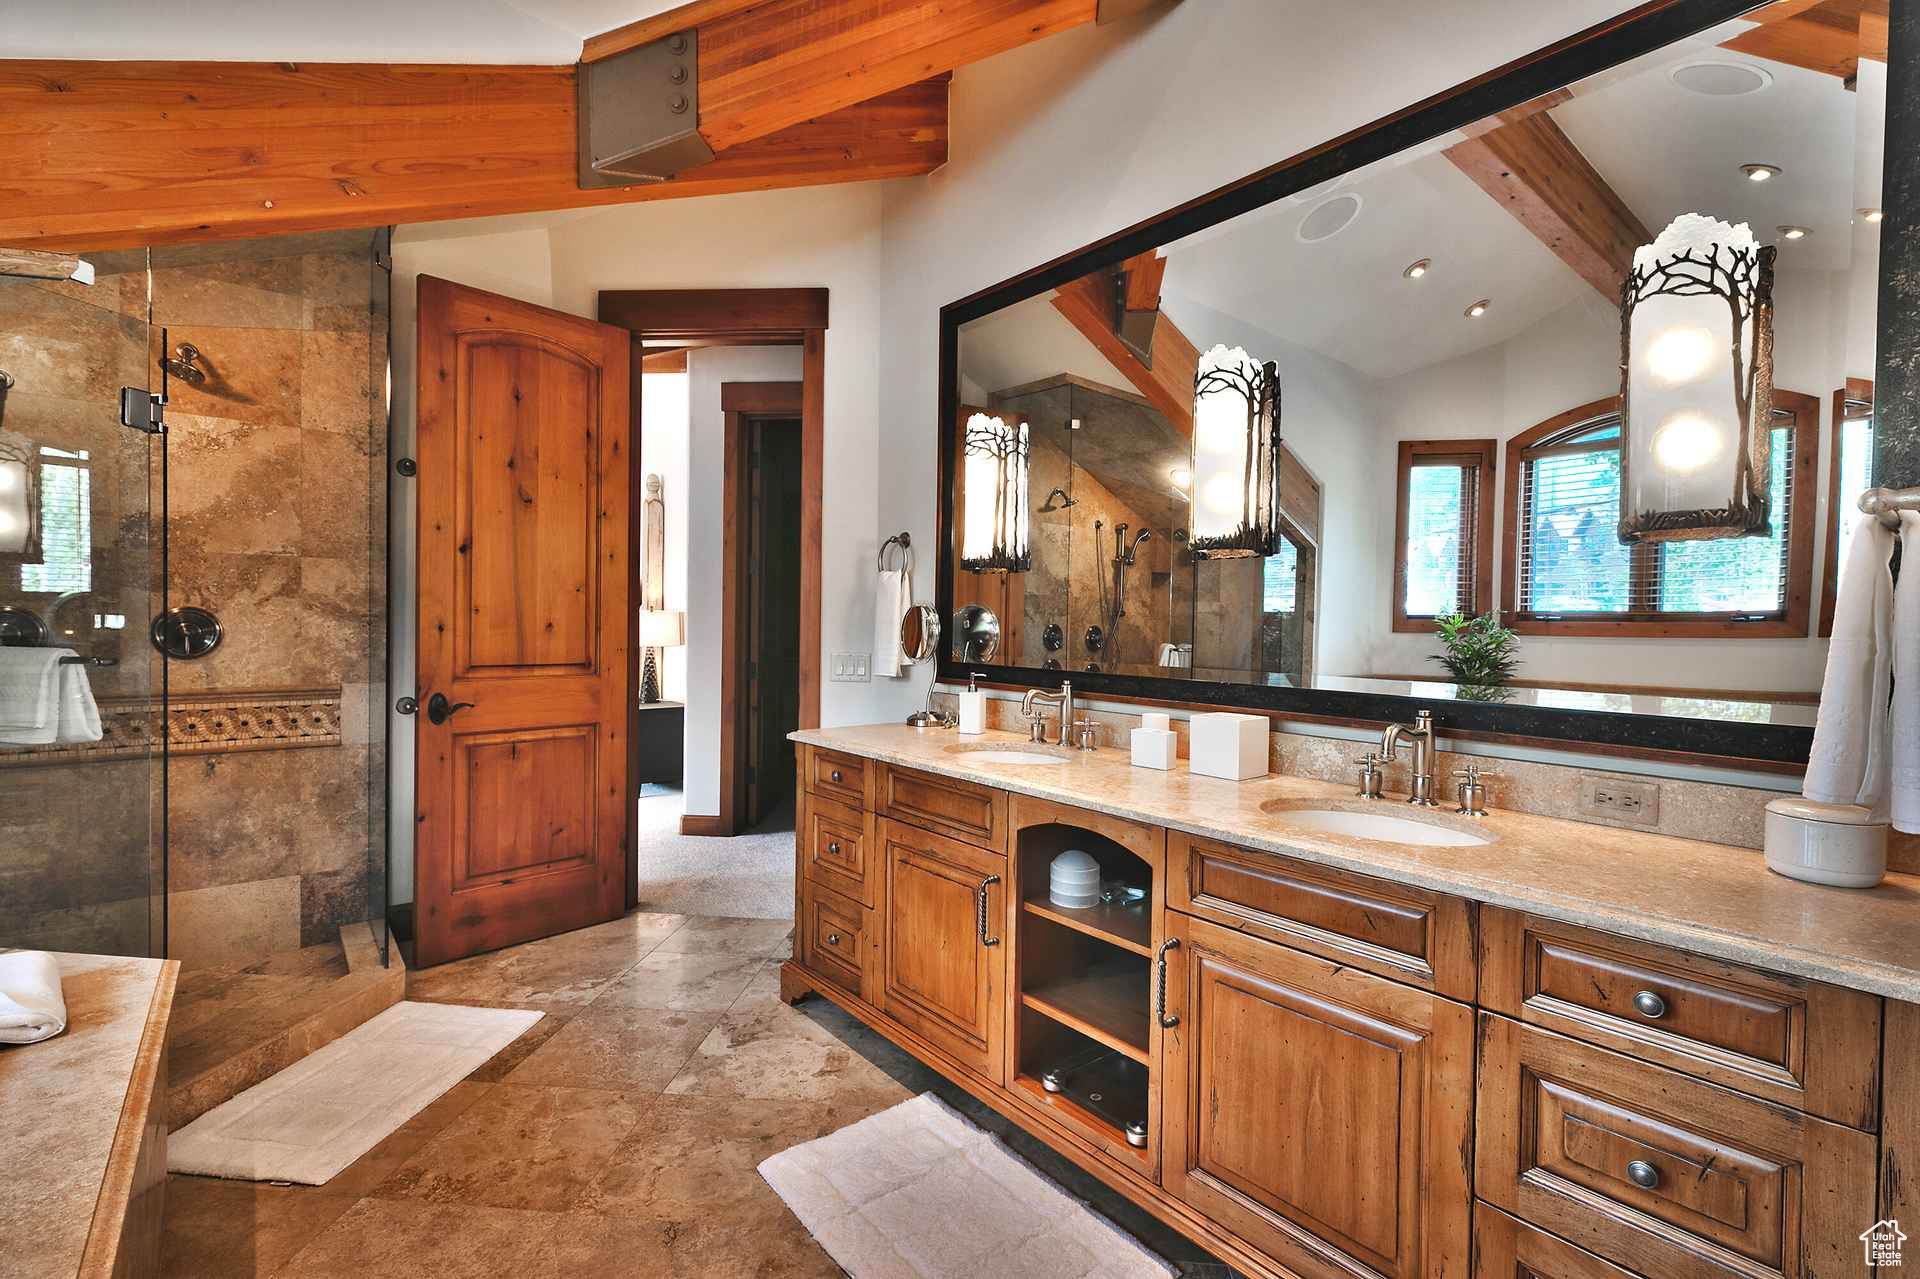 Bathroom with lofted ceiling with beams, tile floors, tiled shower, and double sink vanity